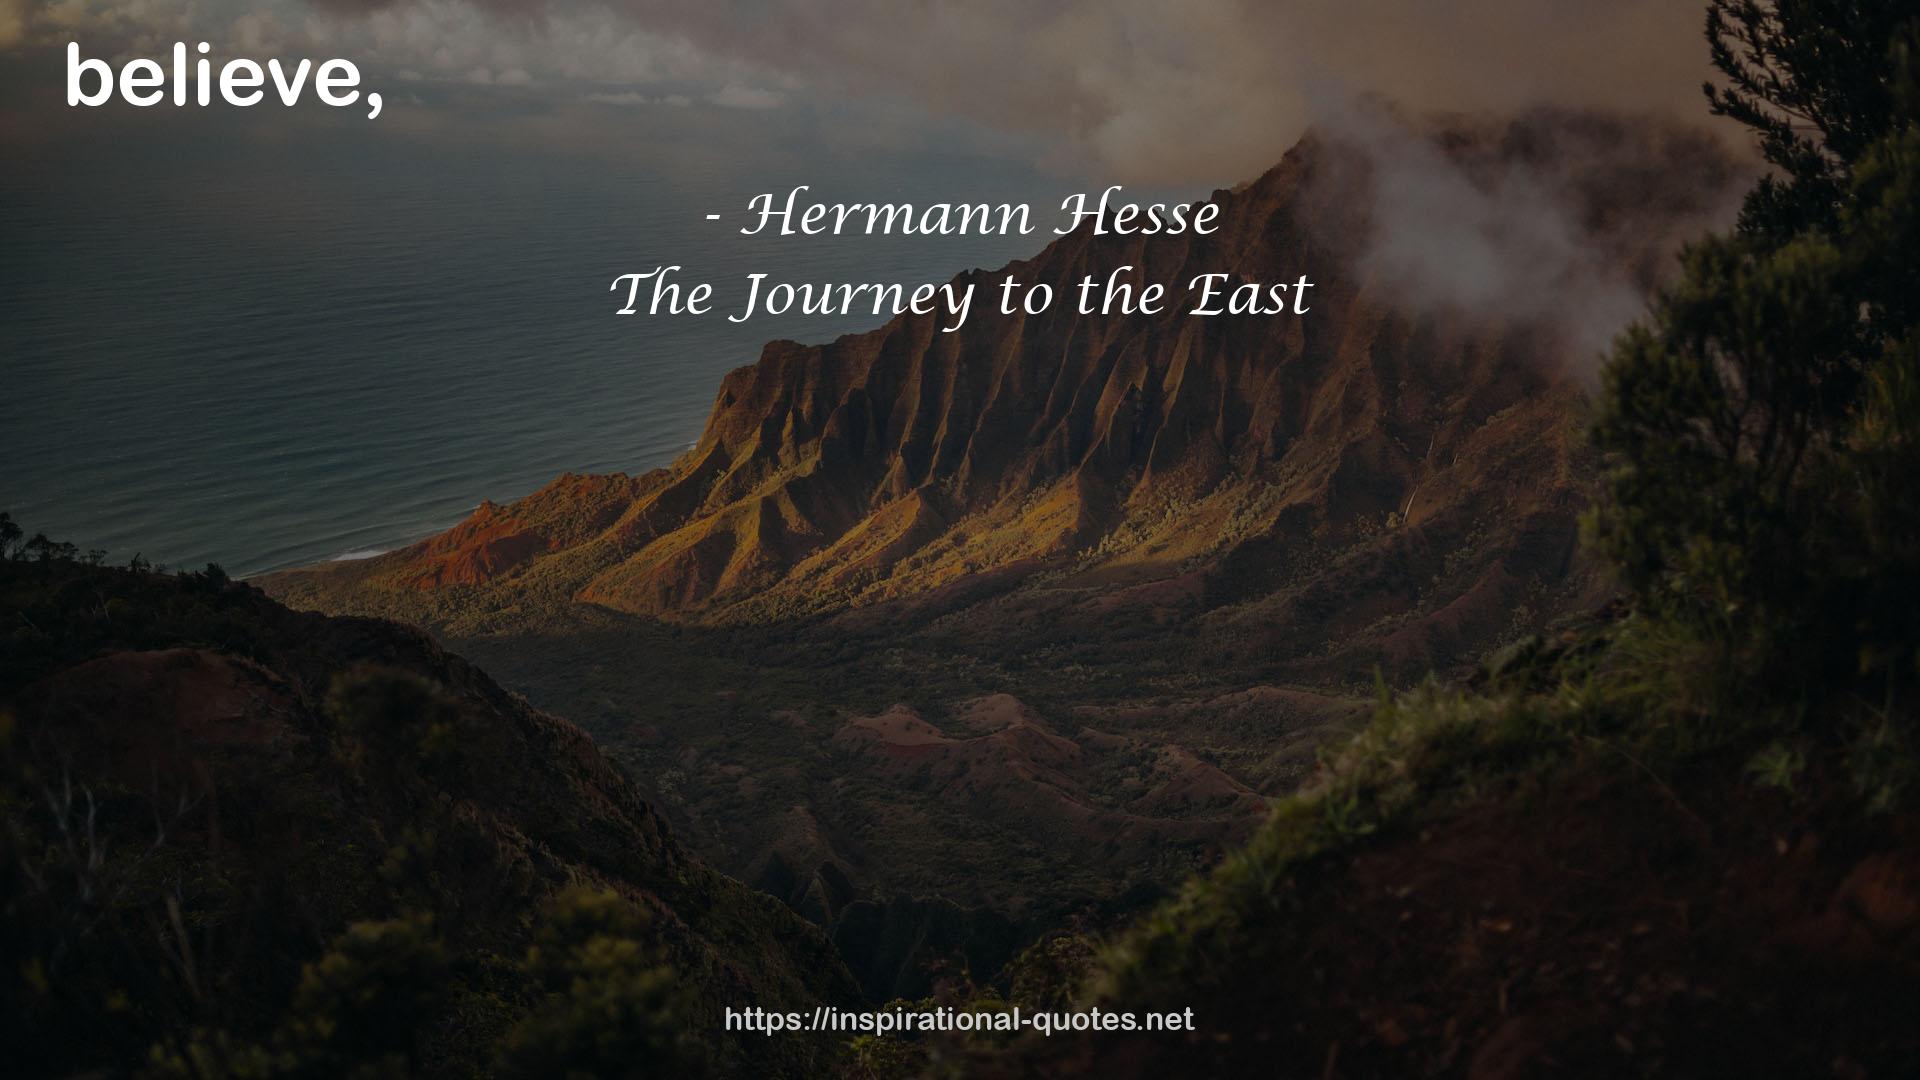 The Journey to the East QUOTES